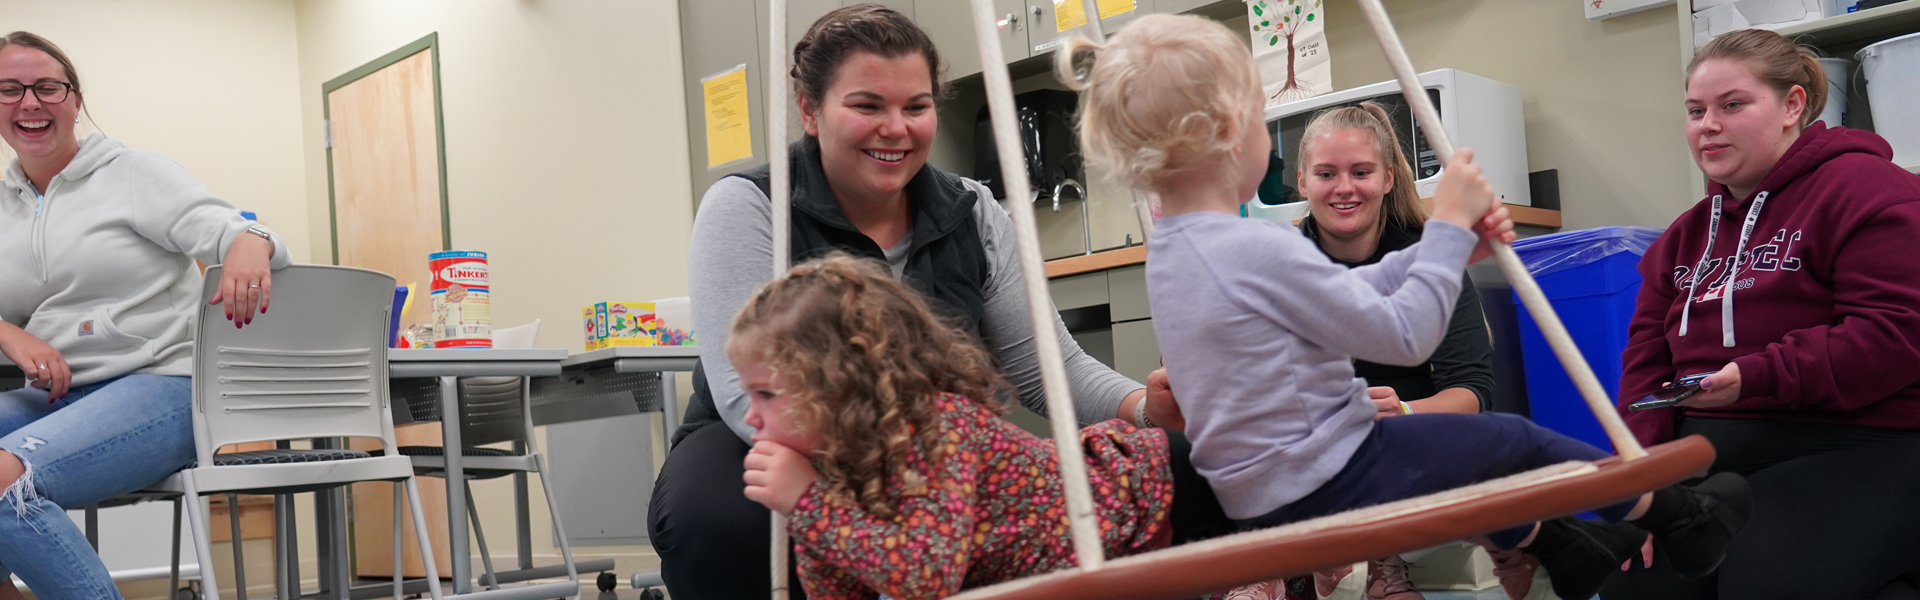 School of Occupational Therapy students work with children in a classroom setting